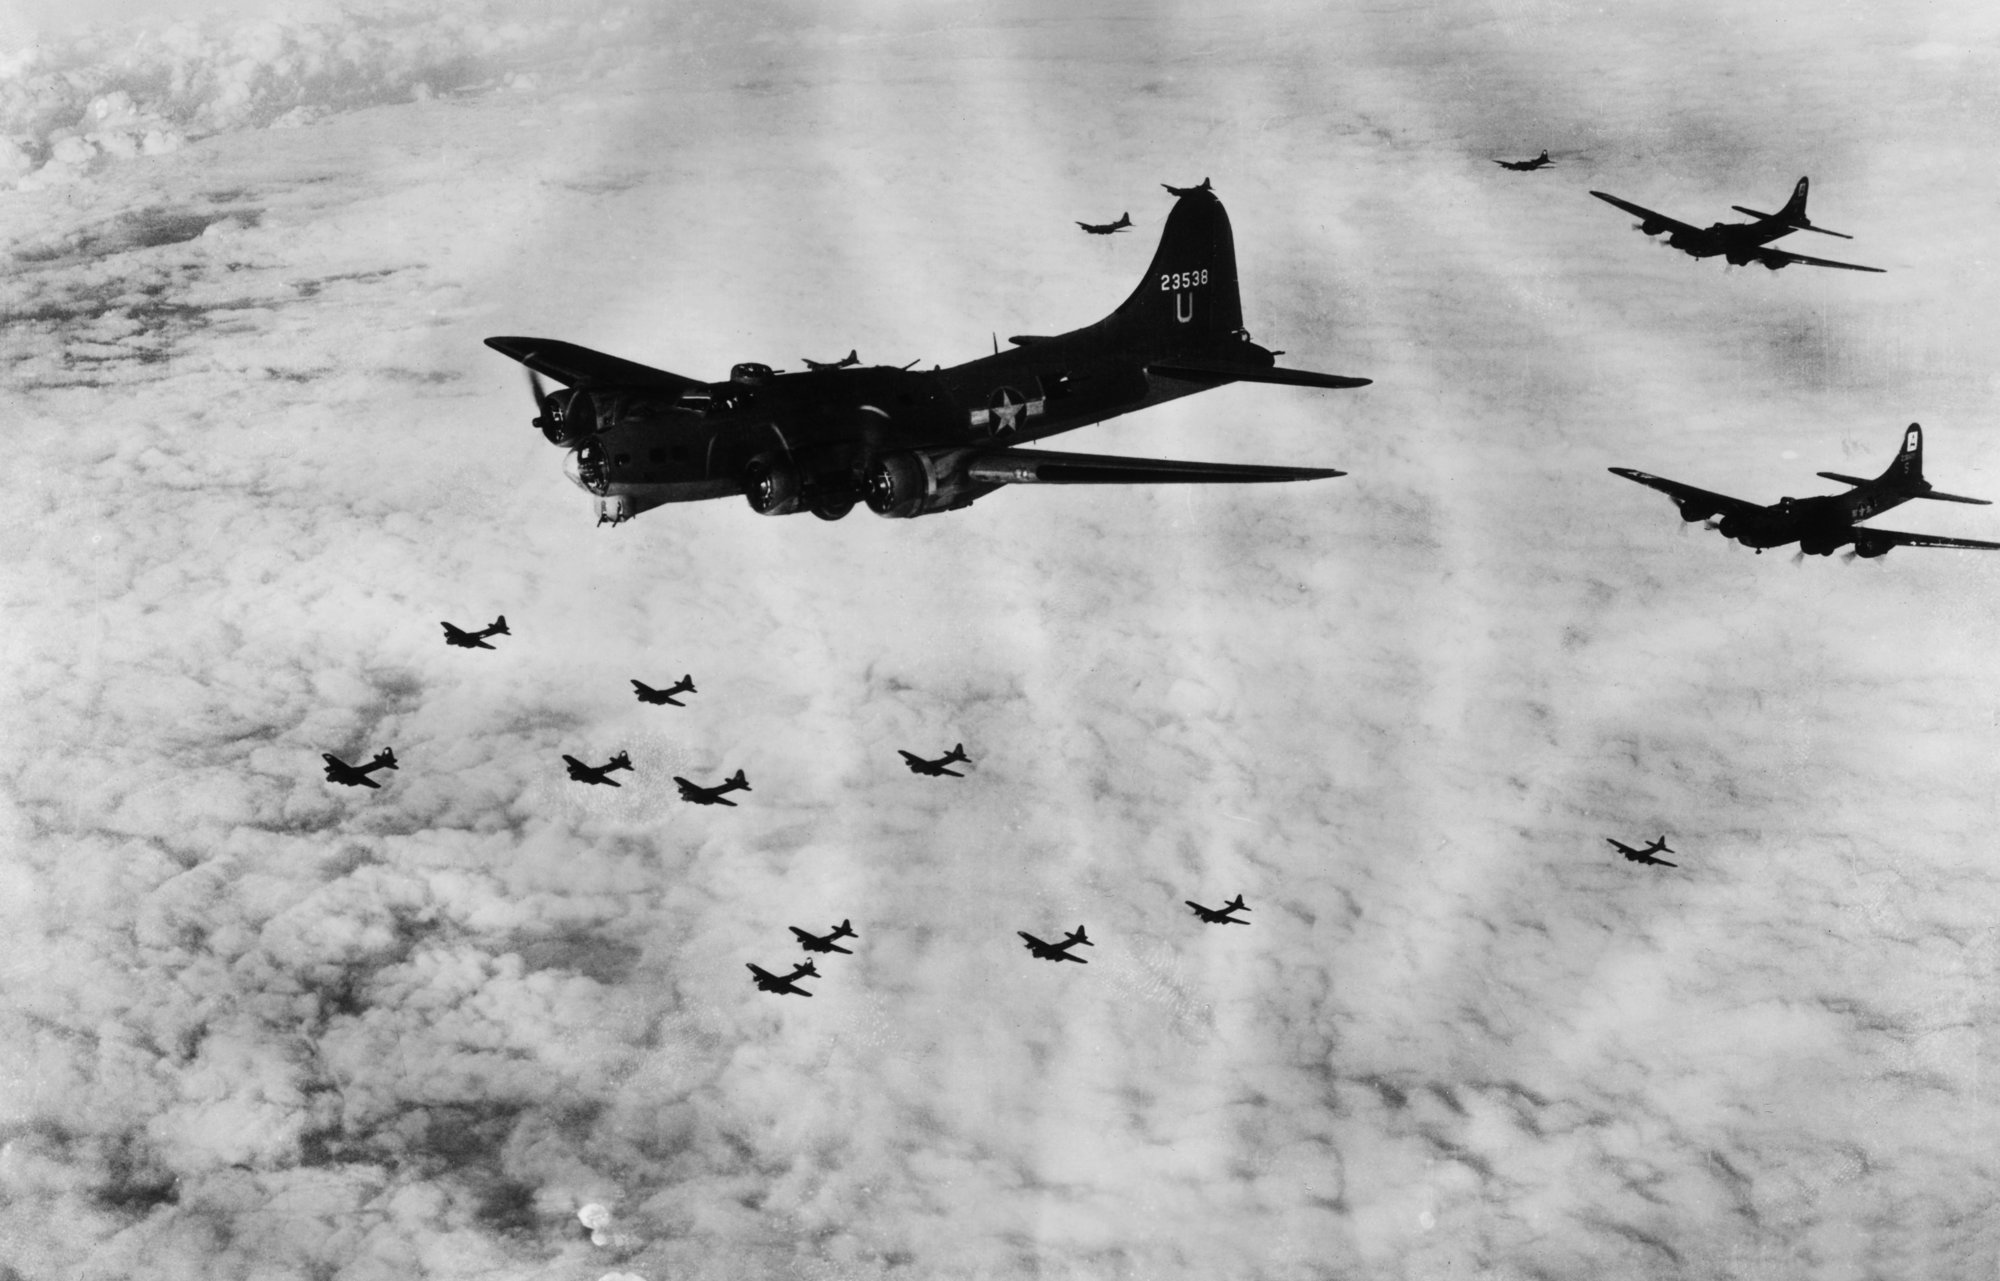 Circa 1942: A squadron of Boeing B-17Gs, known as "Flying Fortresses," flies over clouds en route to Emden, Germany, World War II. The B-17G served in every World War II combat zone and is best known for its strategic daylight bombings of German industrial targets. Photo by Hulton Archive via Getty Images.